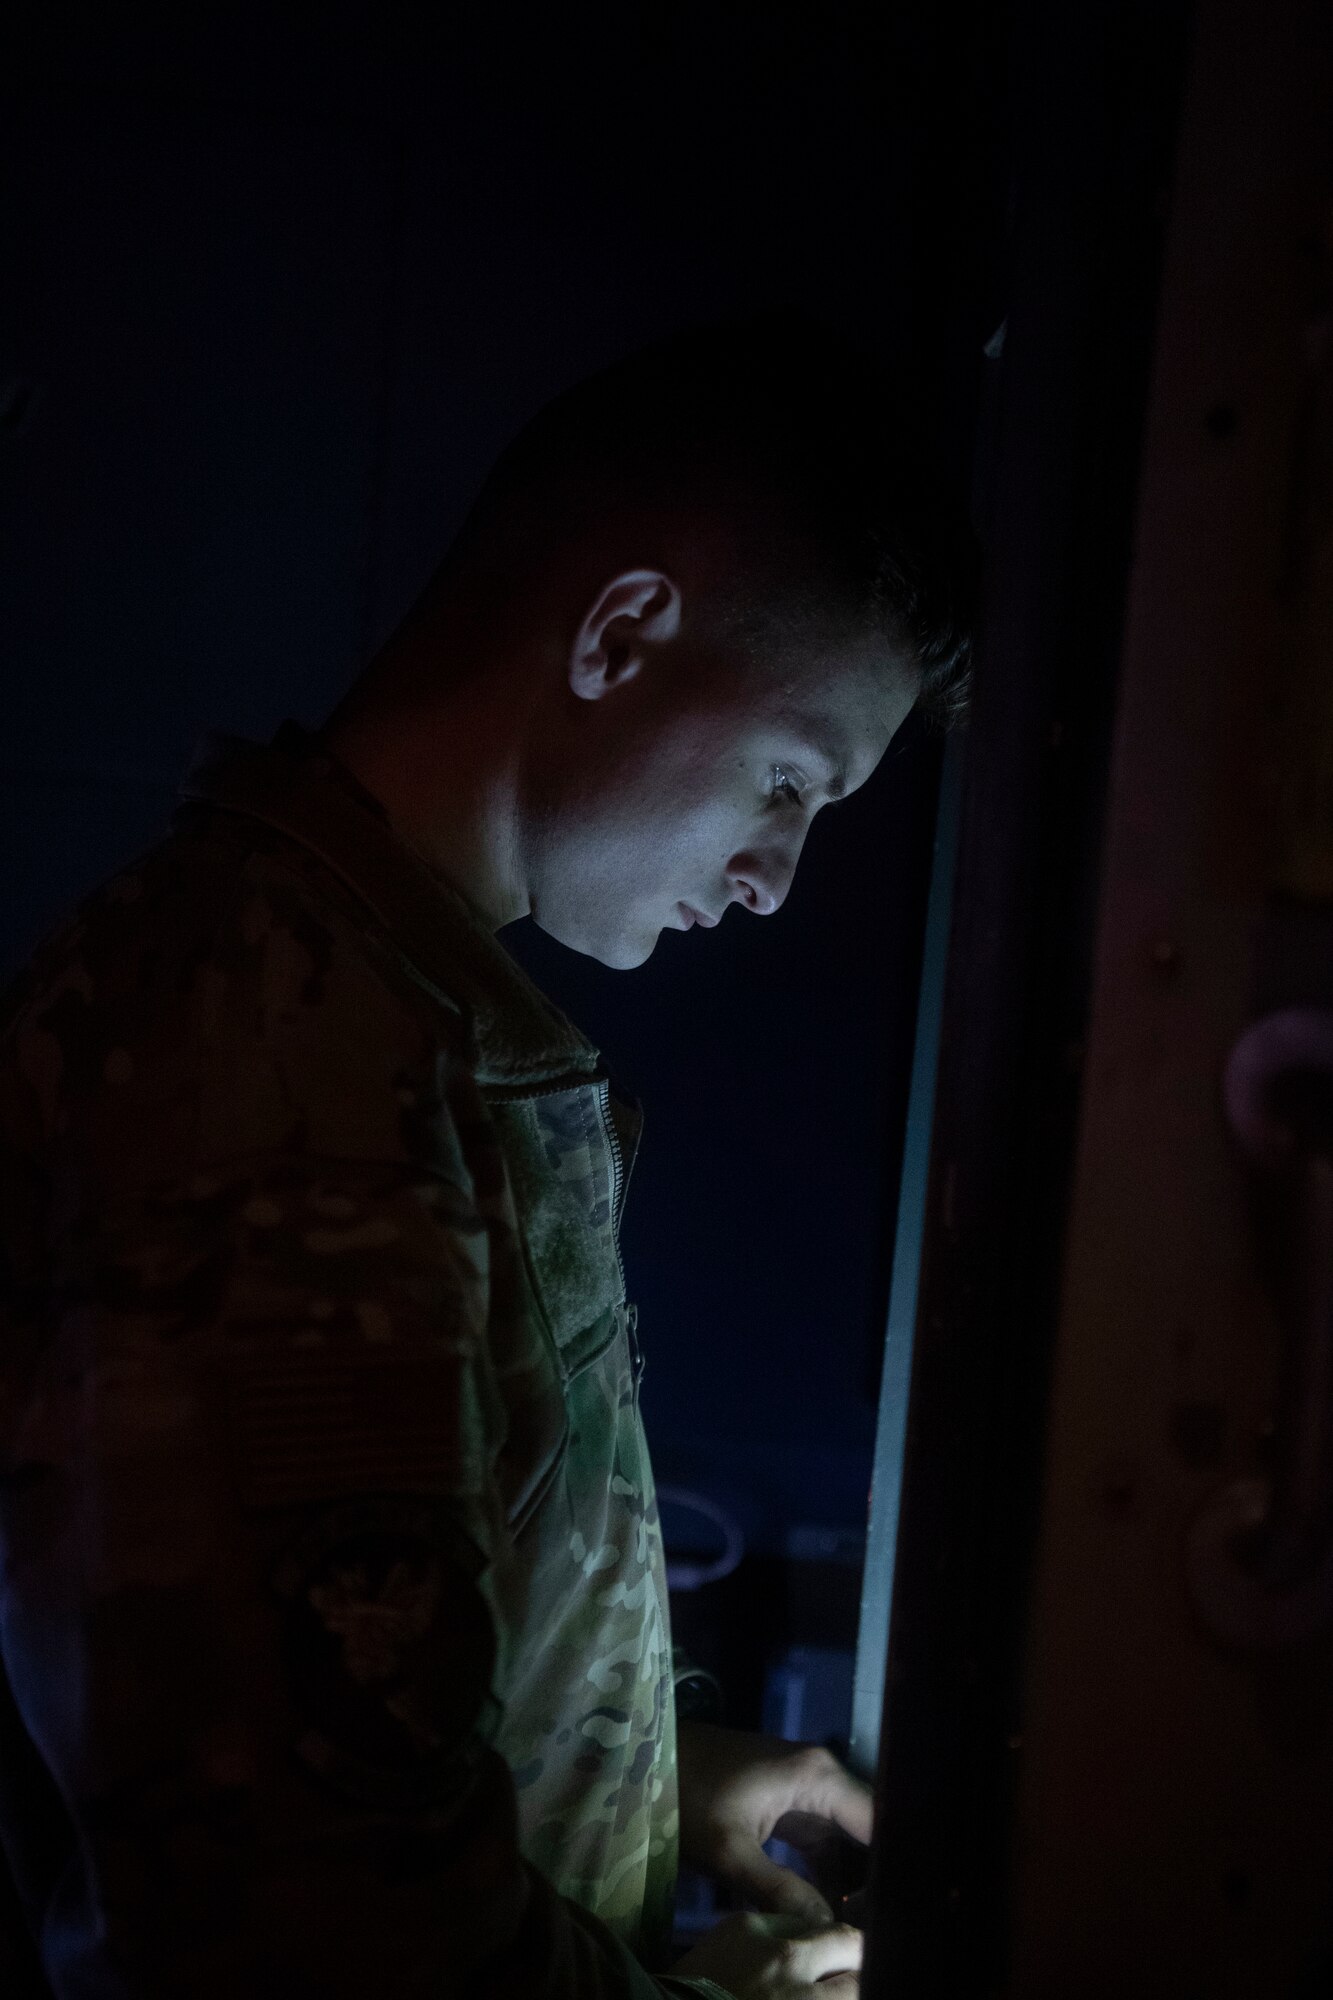 A loadmaster looks down at a screen while inputting data in the back of a C-130.